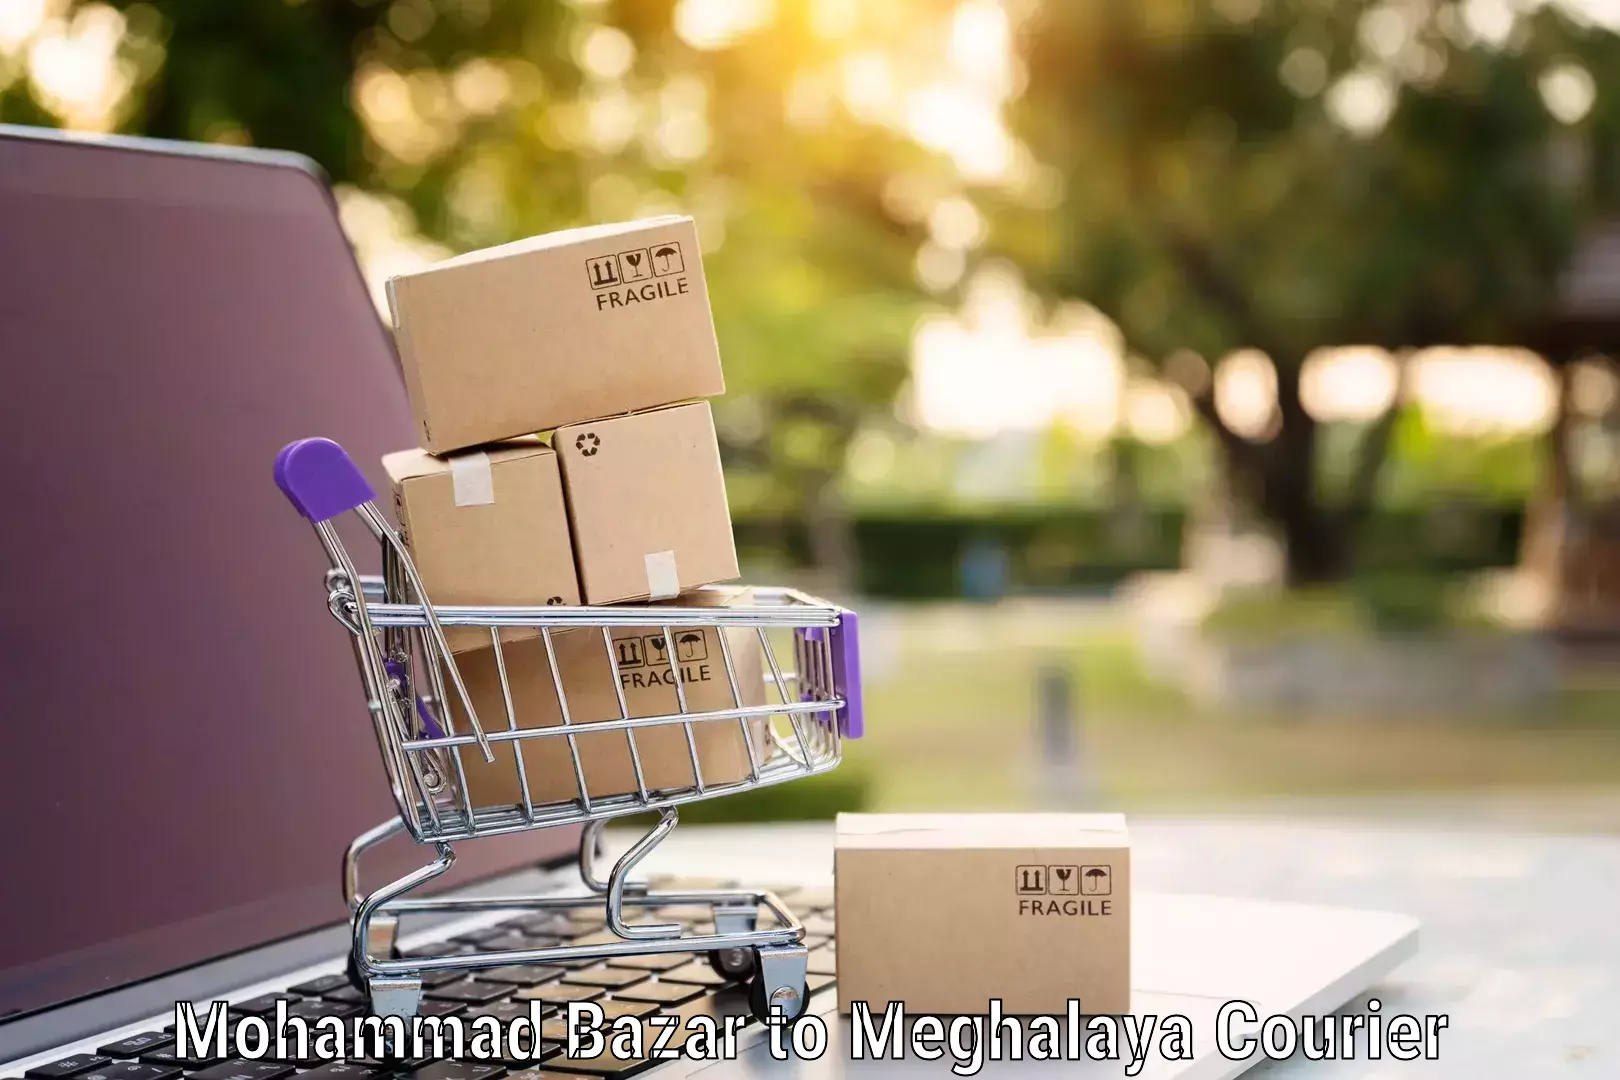 Moving and storage services Mohammad Bazar to Meghalaya